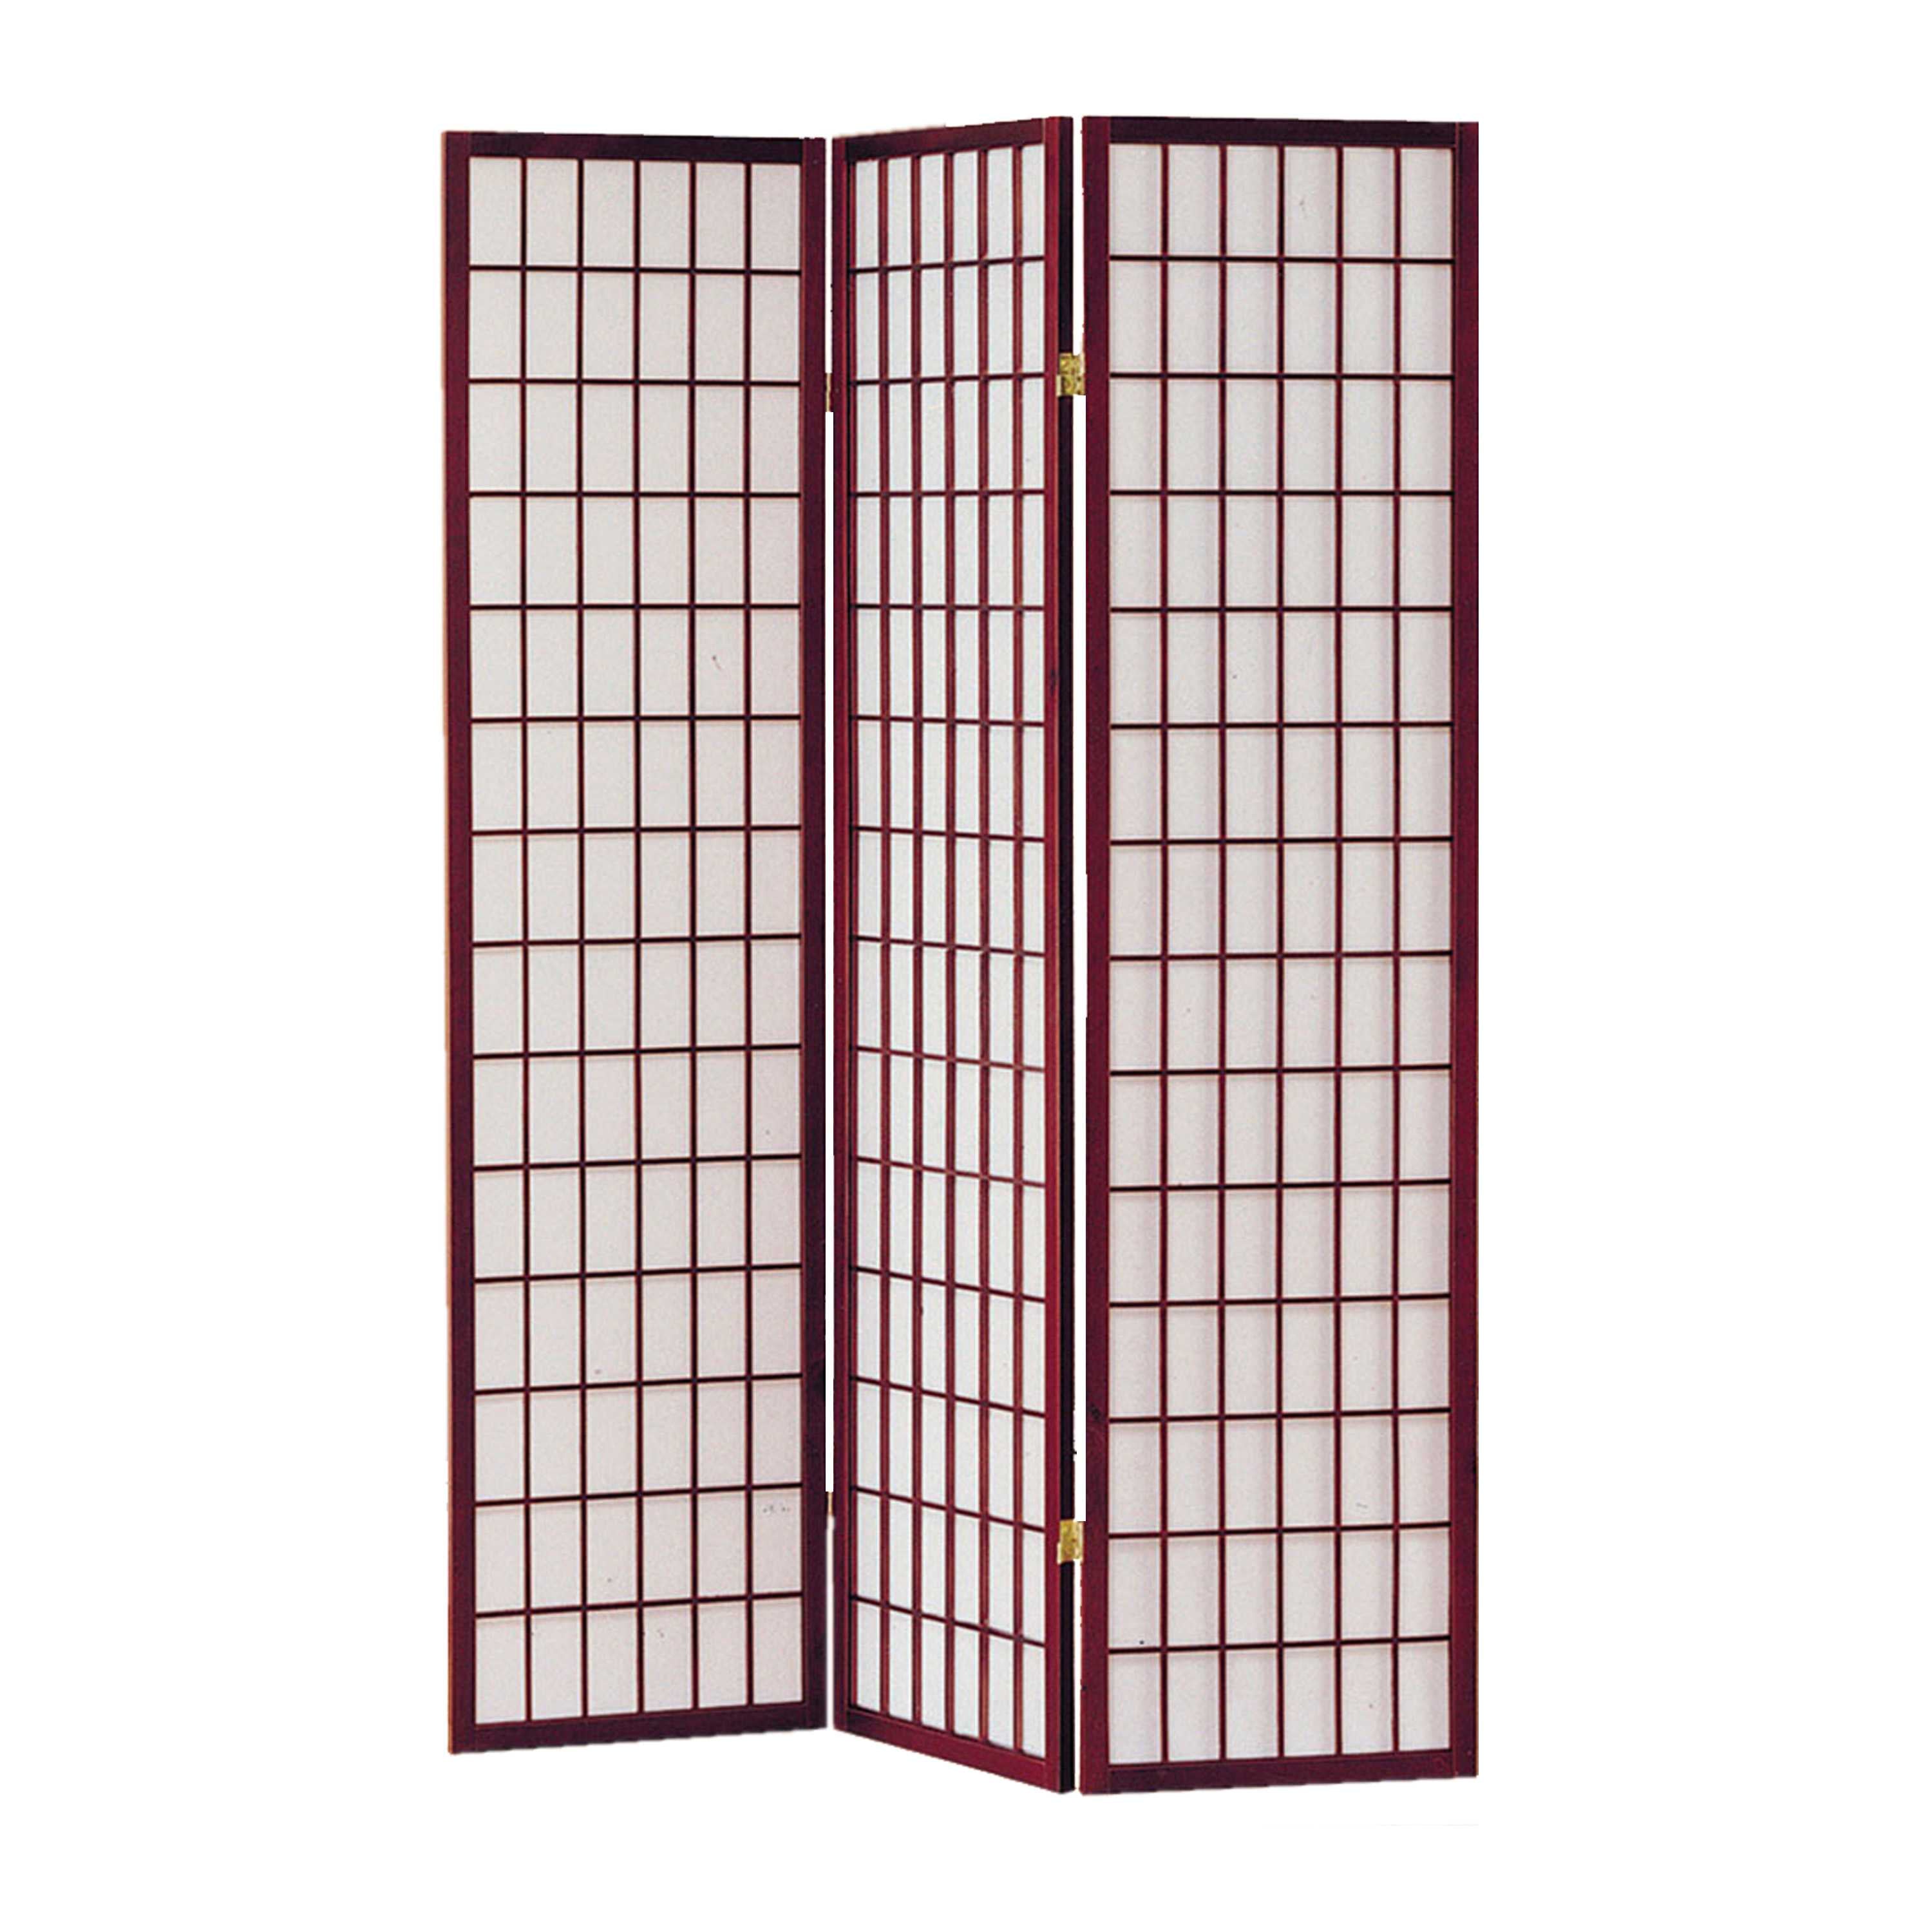 3 Panel Room Divider with Shoji Inserts, Cherry Brown and White